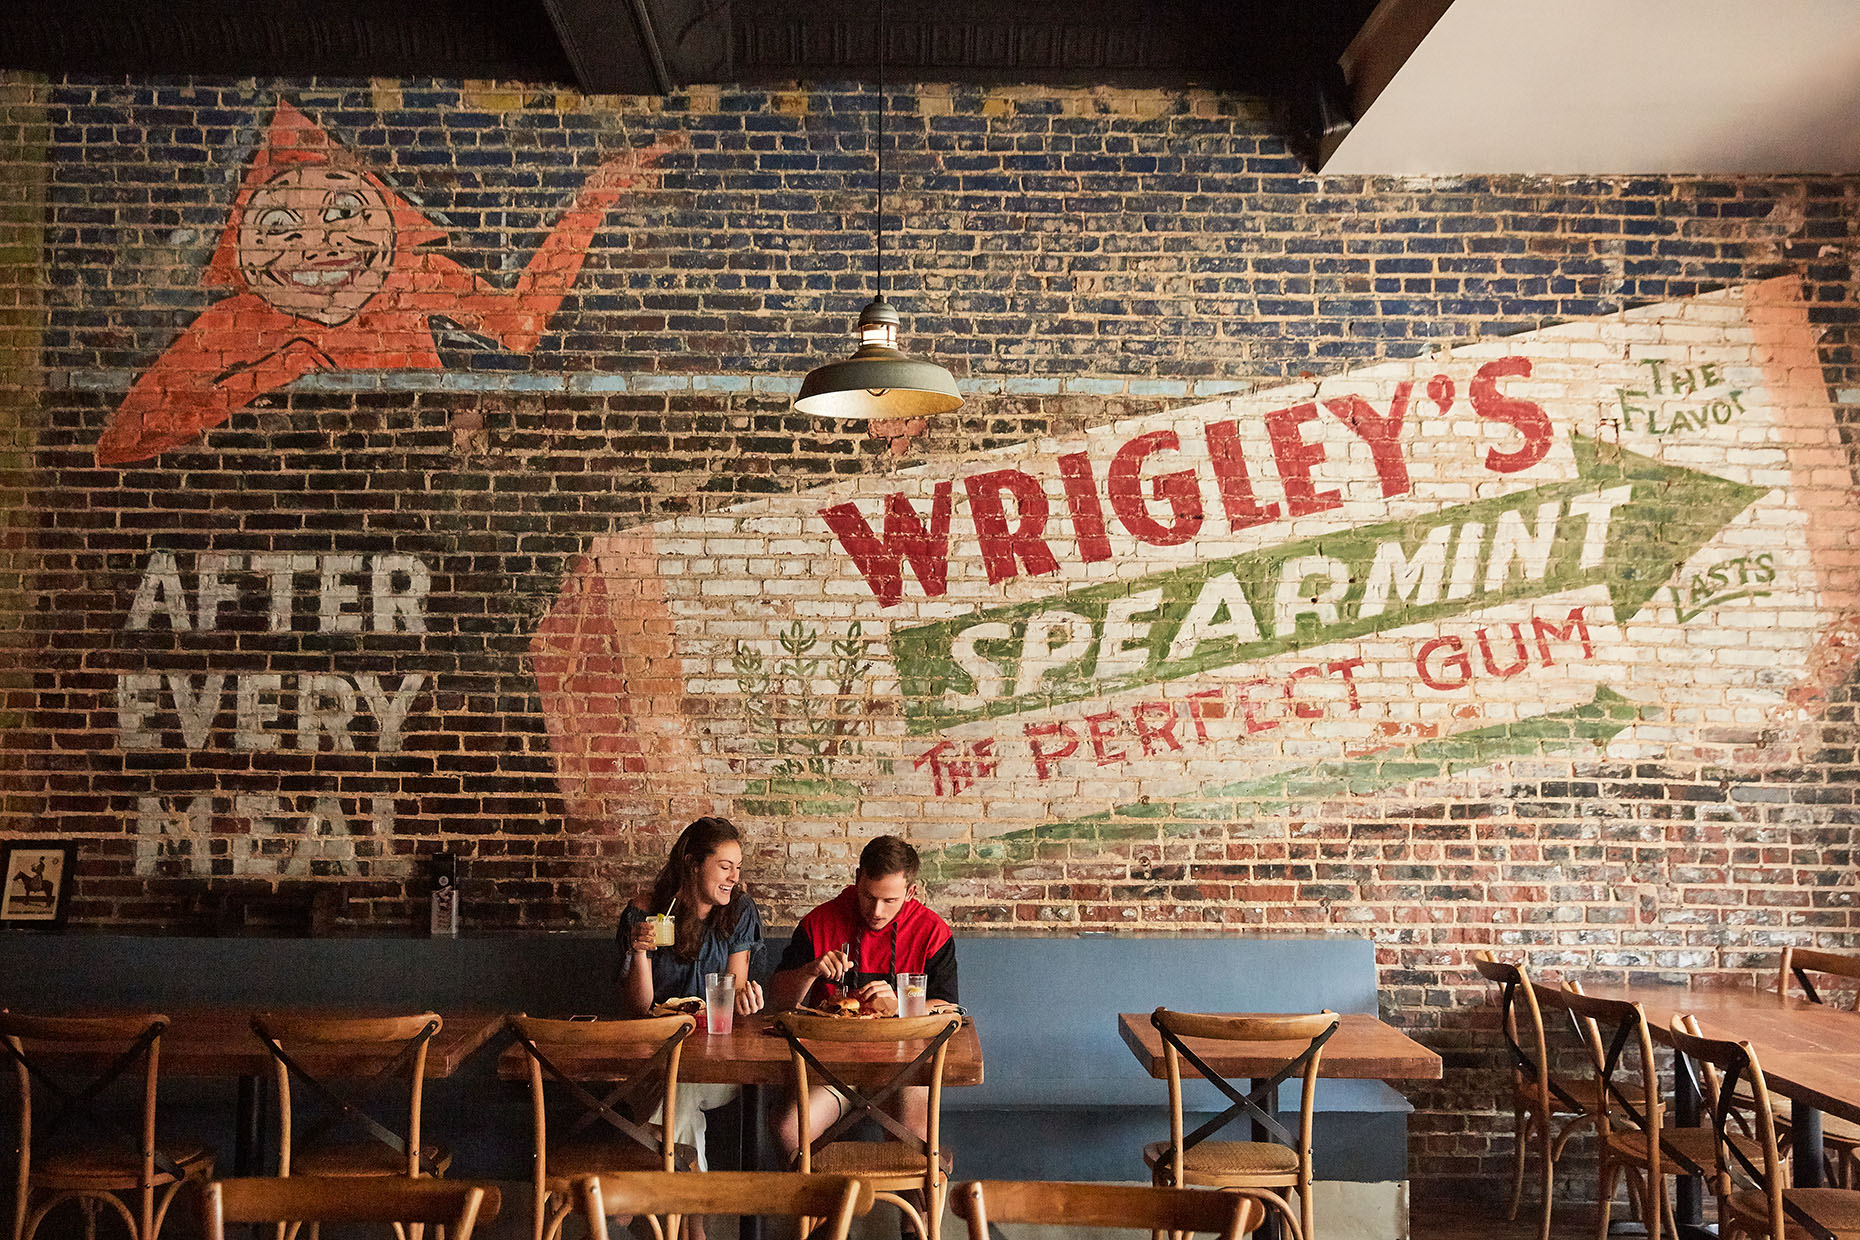 The Wrigley Taproom Eatery, Kentucky Tourism